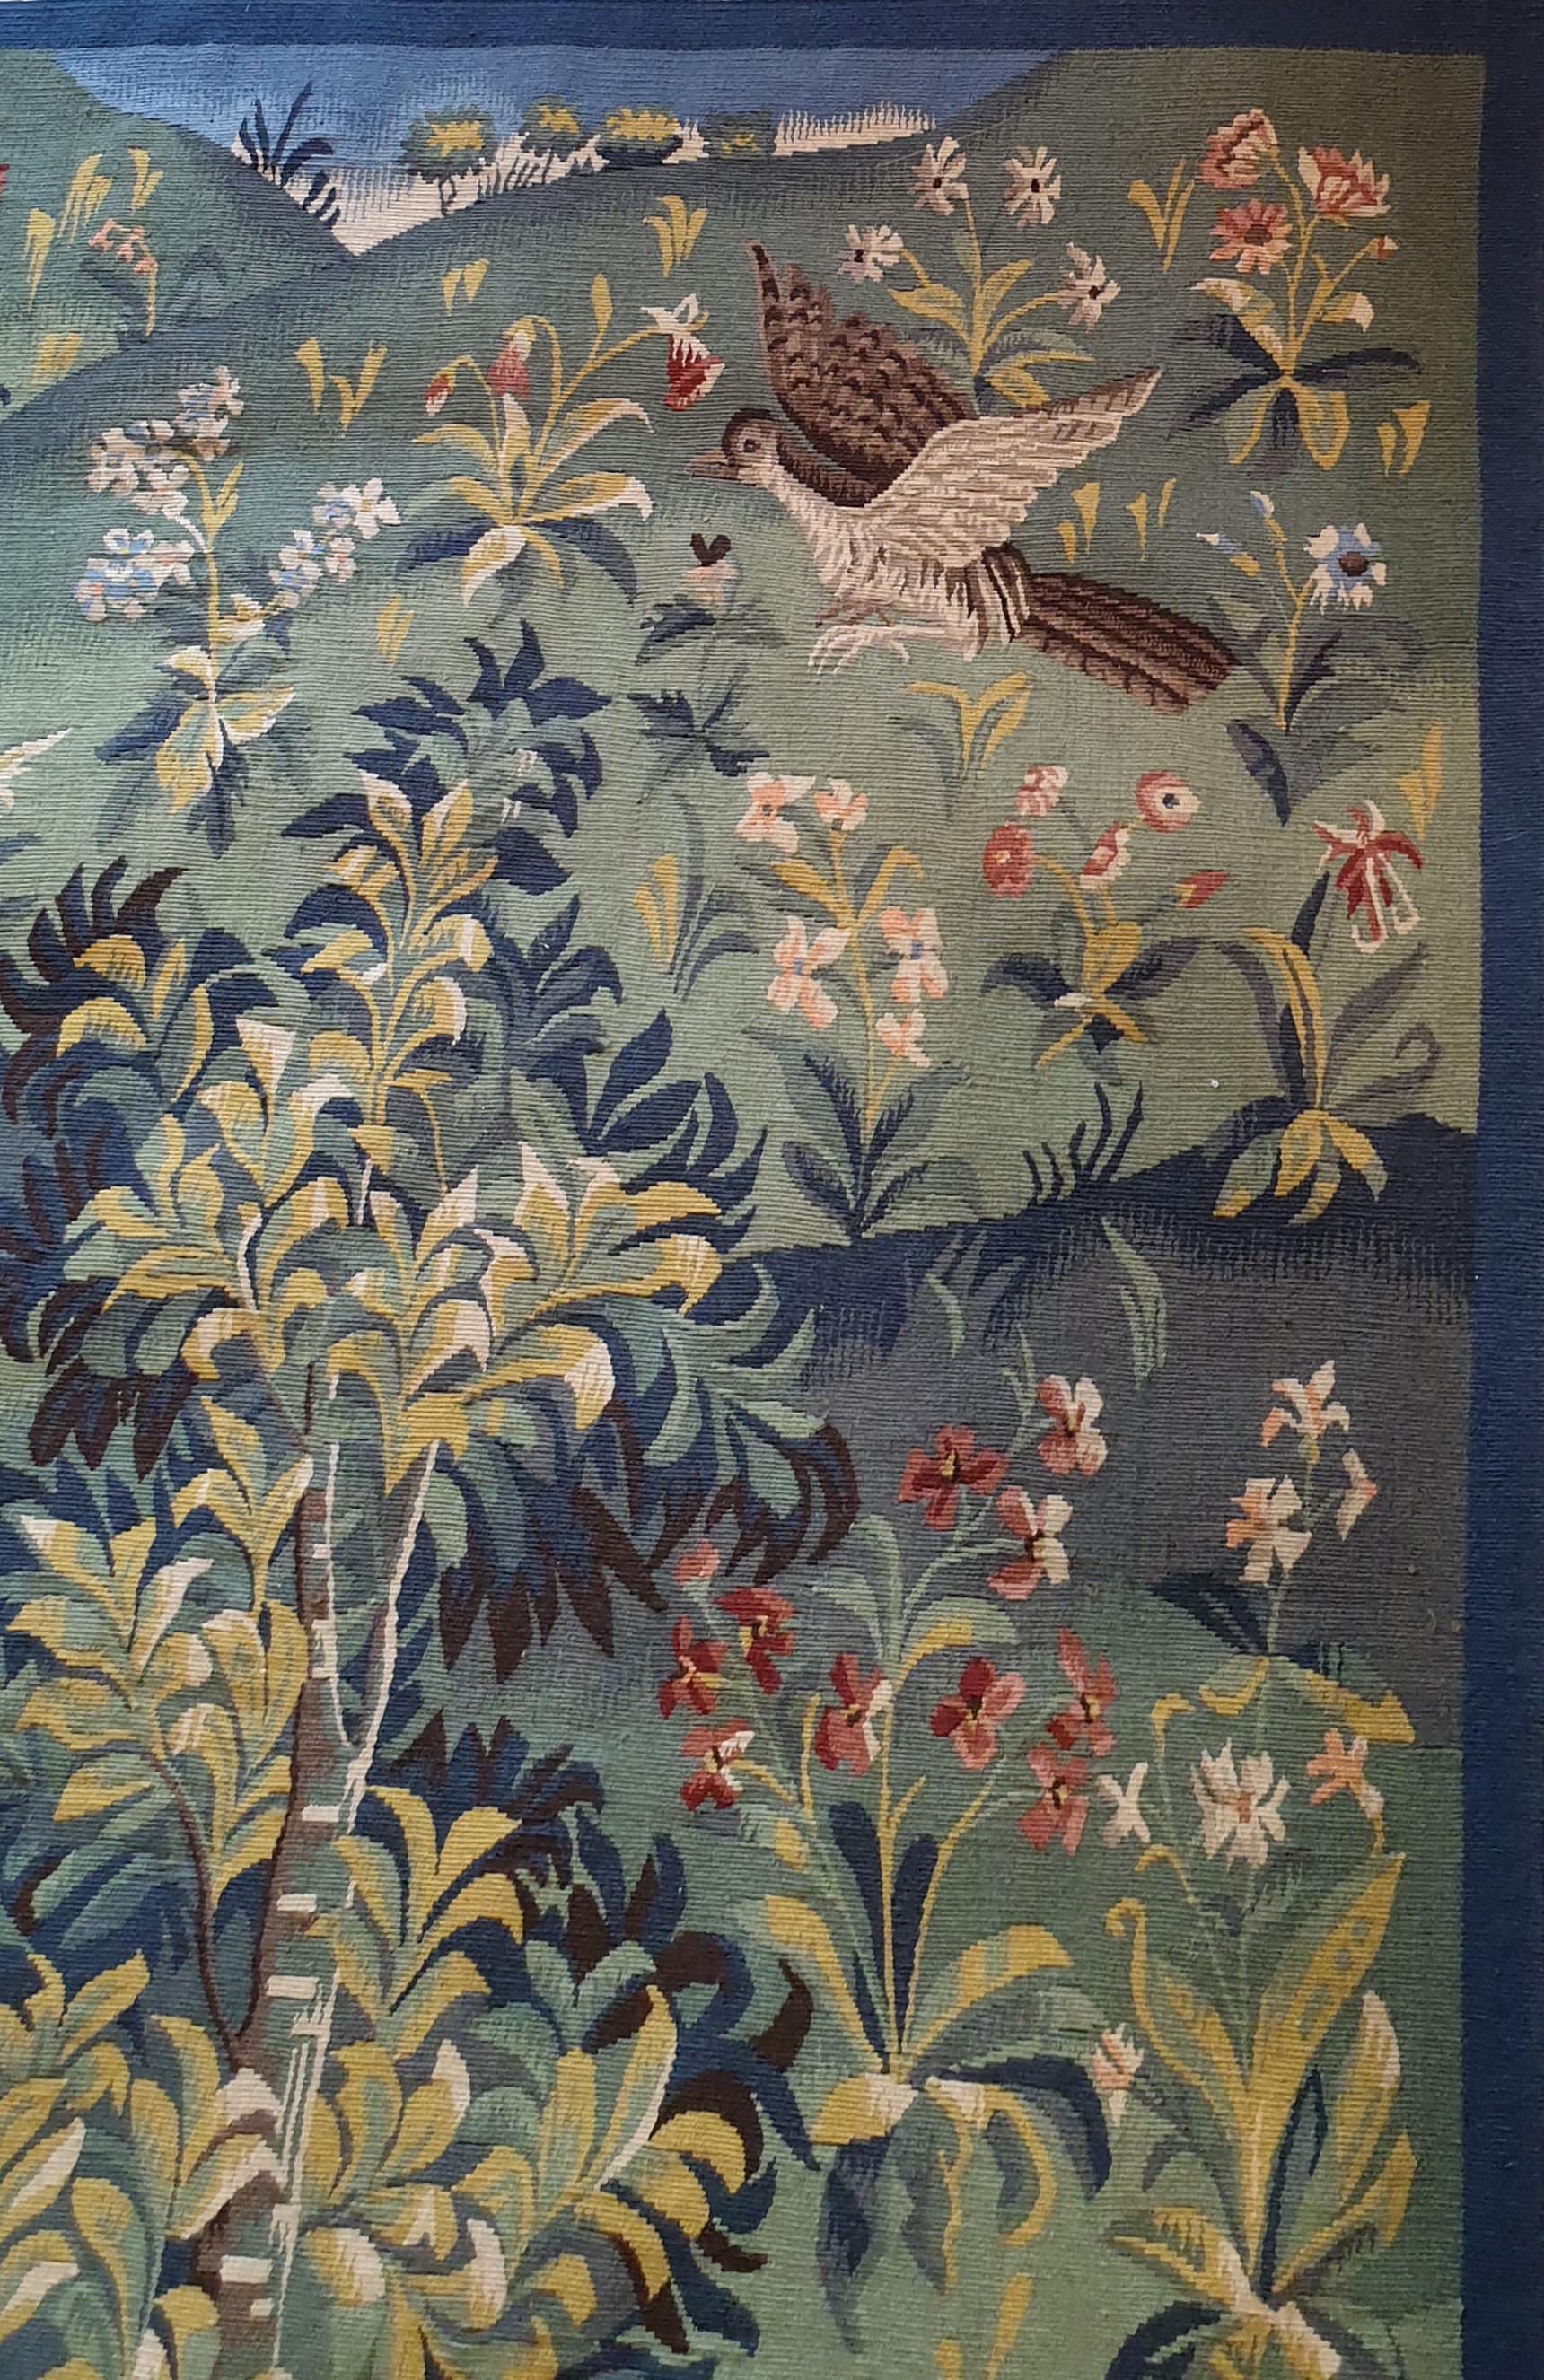  Thousand Flowers Mediaeval Tapestry Made in the 19th Century - N° 765 5